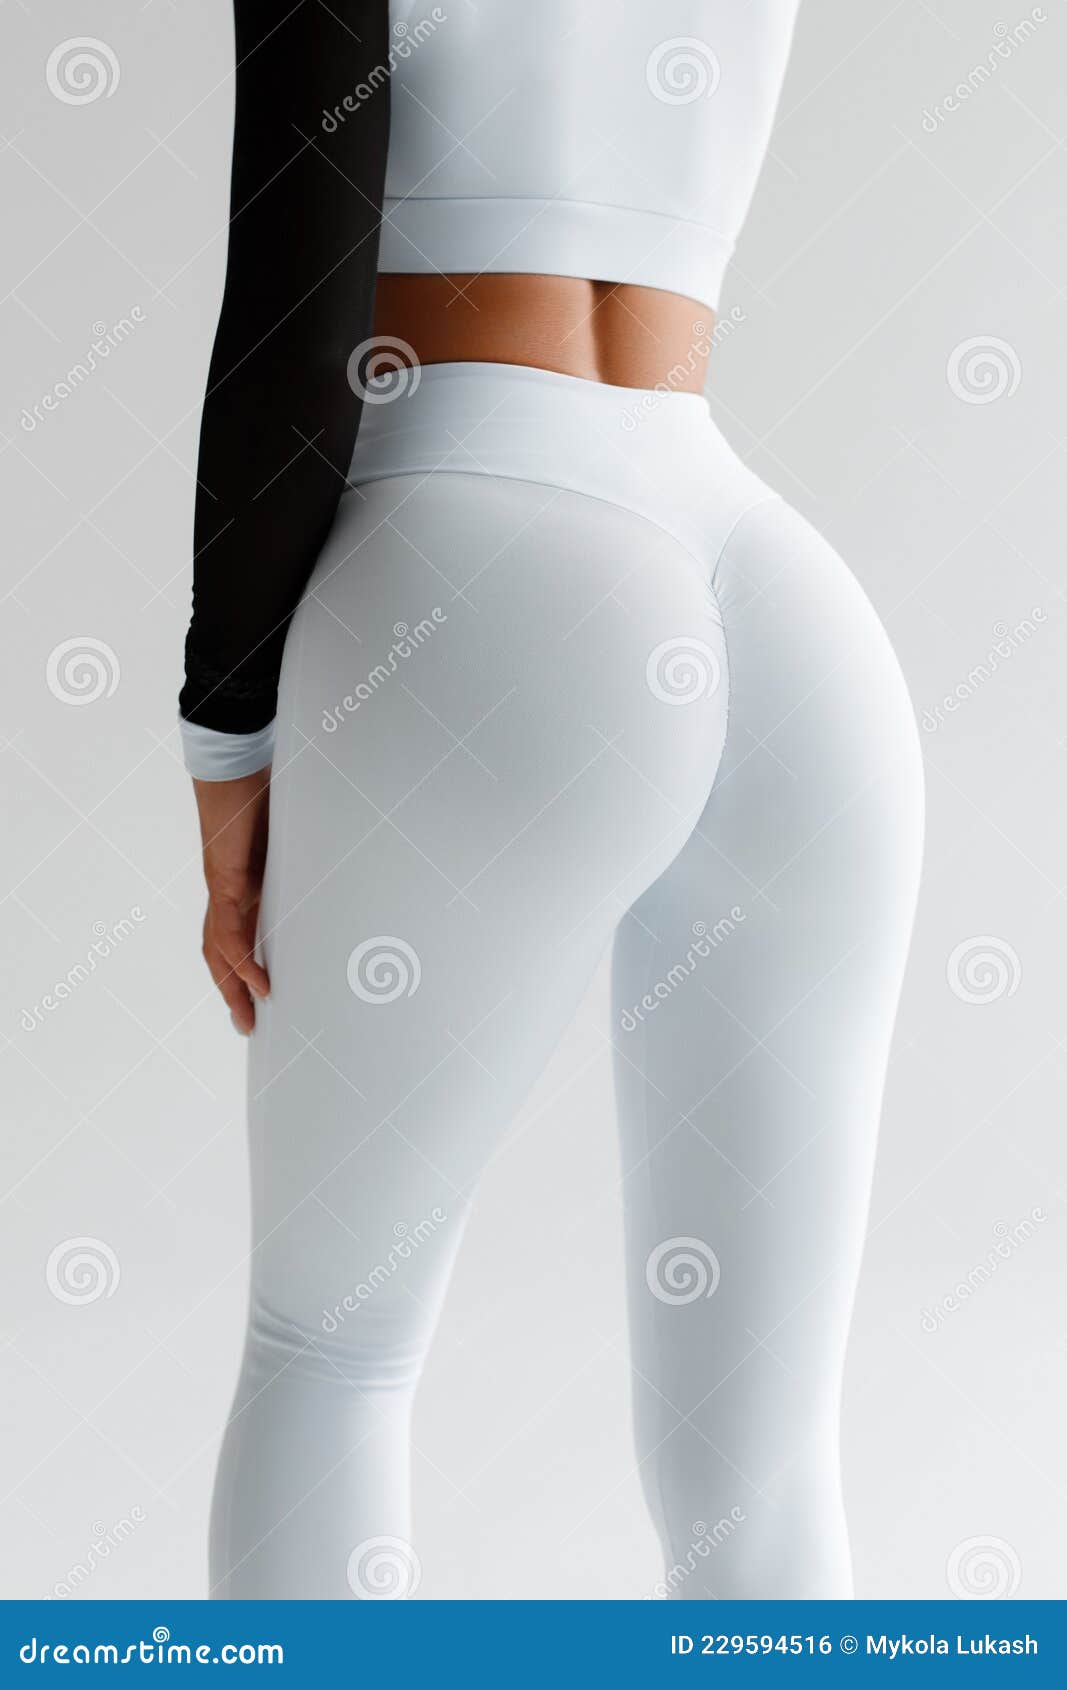 Perfect Ass In Tight Leggings